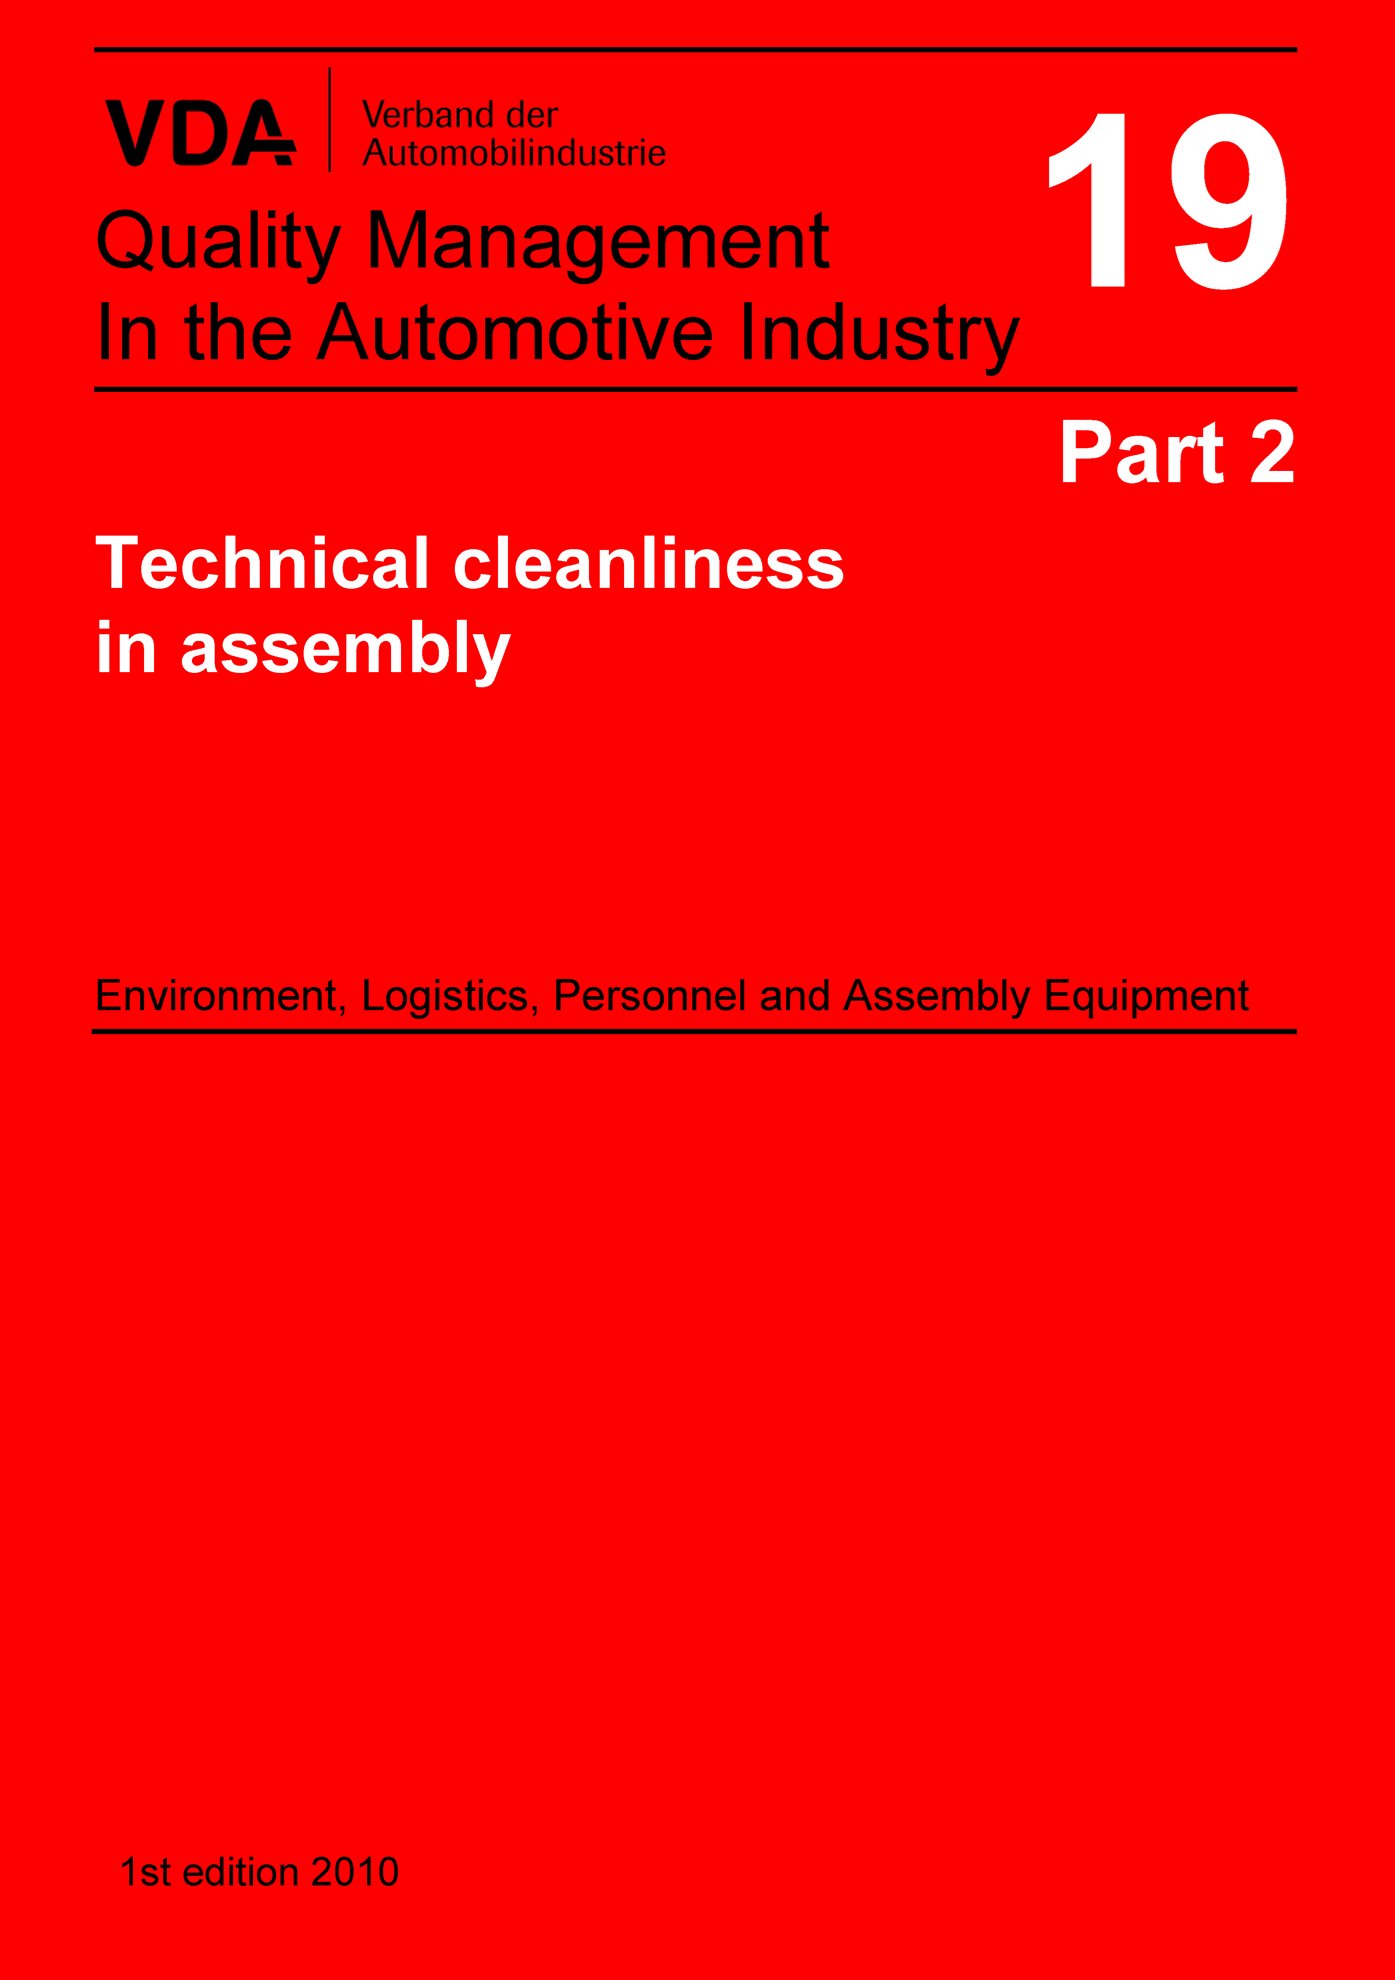 Publikácie  VDA Volume 19 Part 2, Technical cleanliness in assembly - Environment, Logistics, Personnel and Assembly Equipment - 1st edition 2010 1.1.2010 náhľad